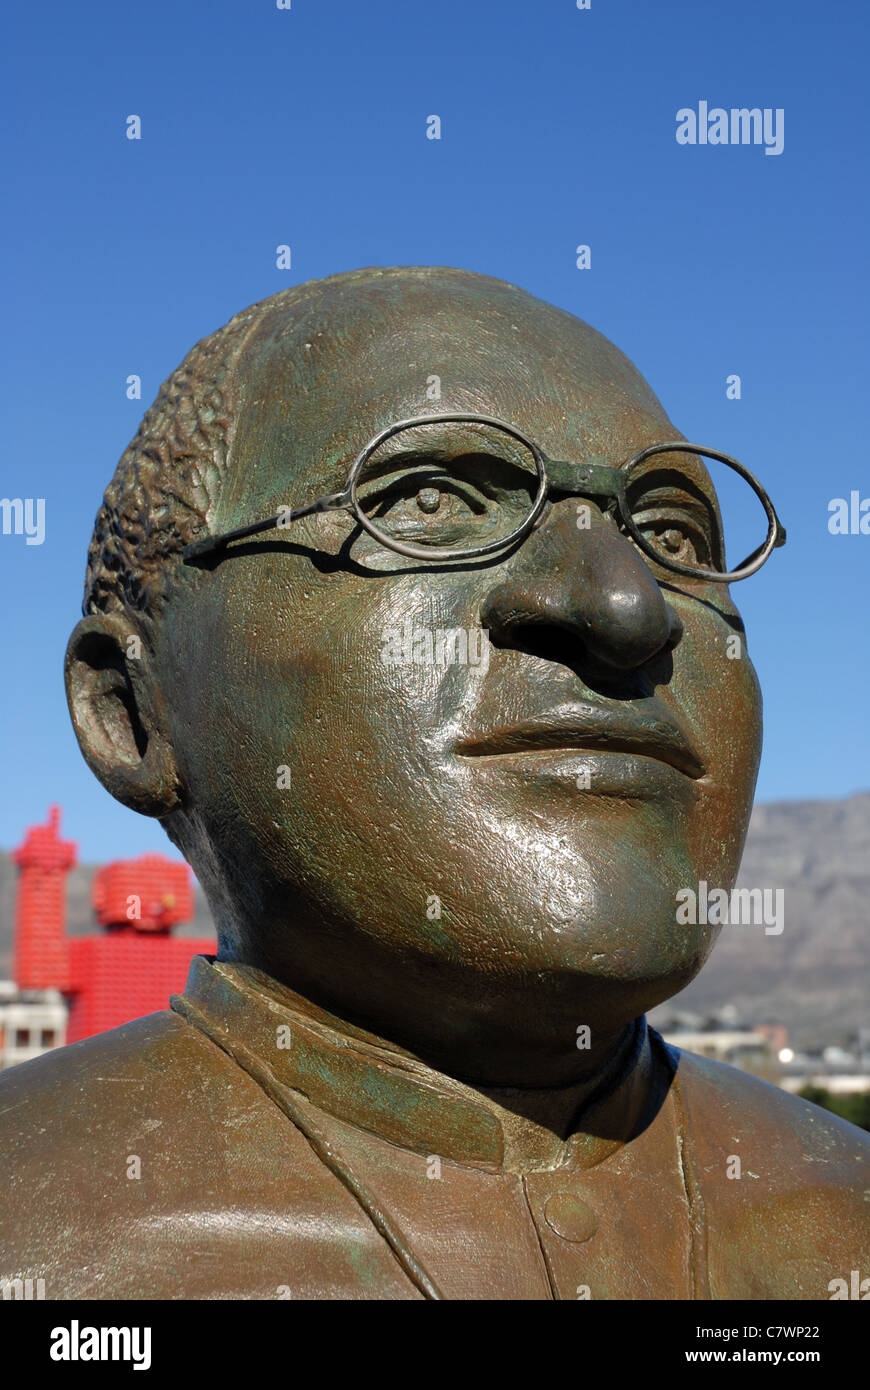 bust of Desmond Tutu, Nobel Peace Prize winner, Nobel Square, V & A Waterfront, Cape Town, Western Cape, South Africa Stock Photo